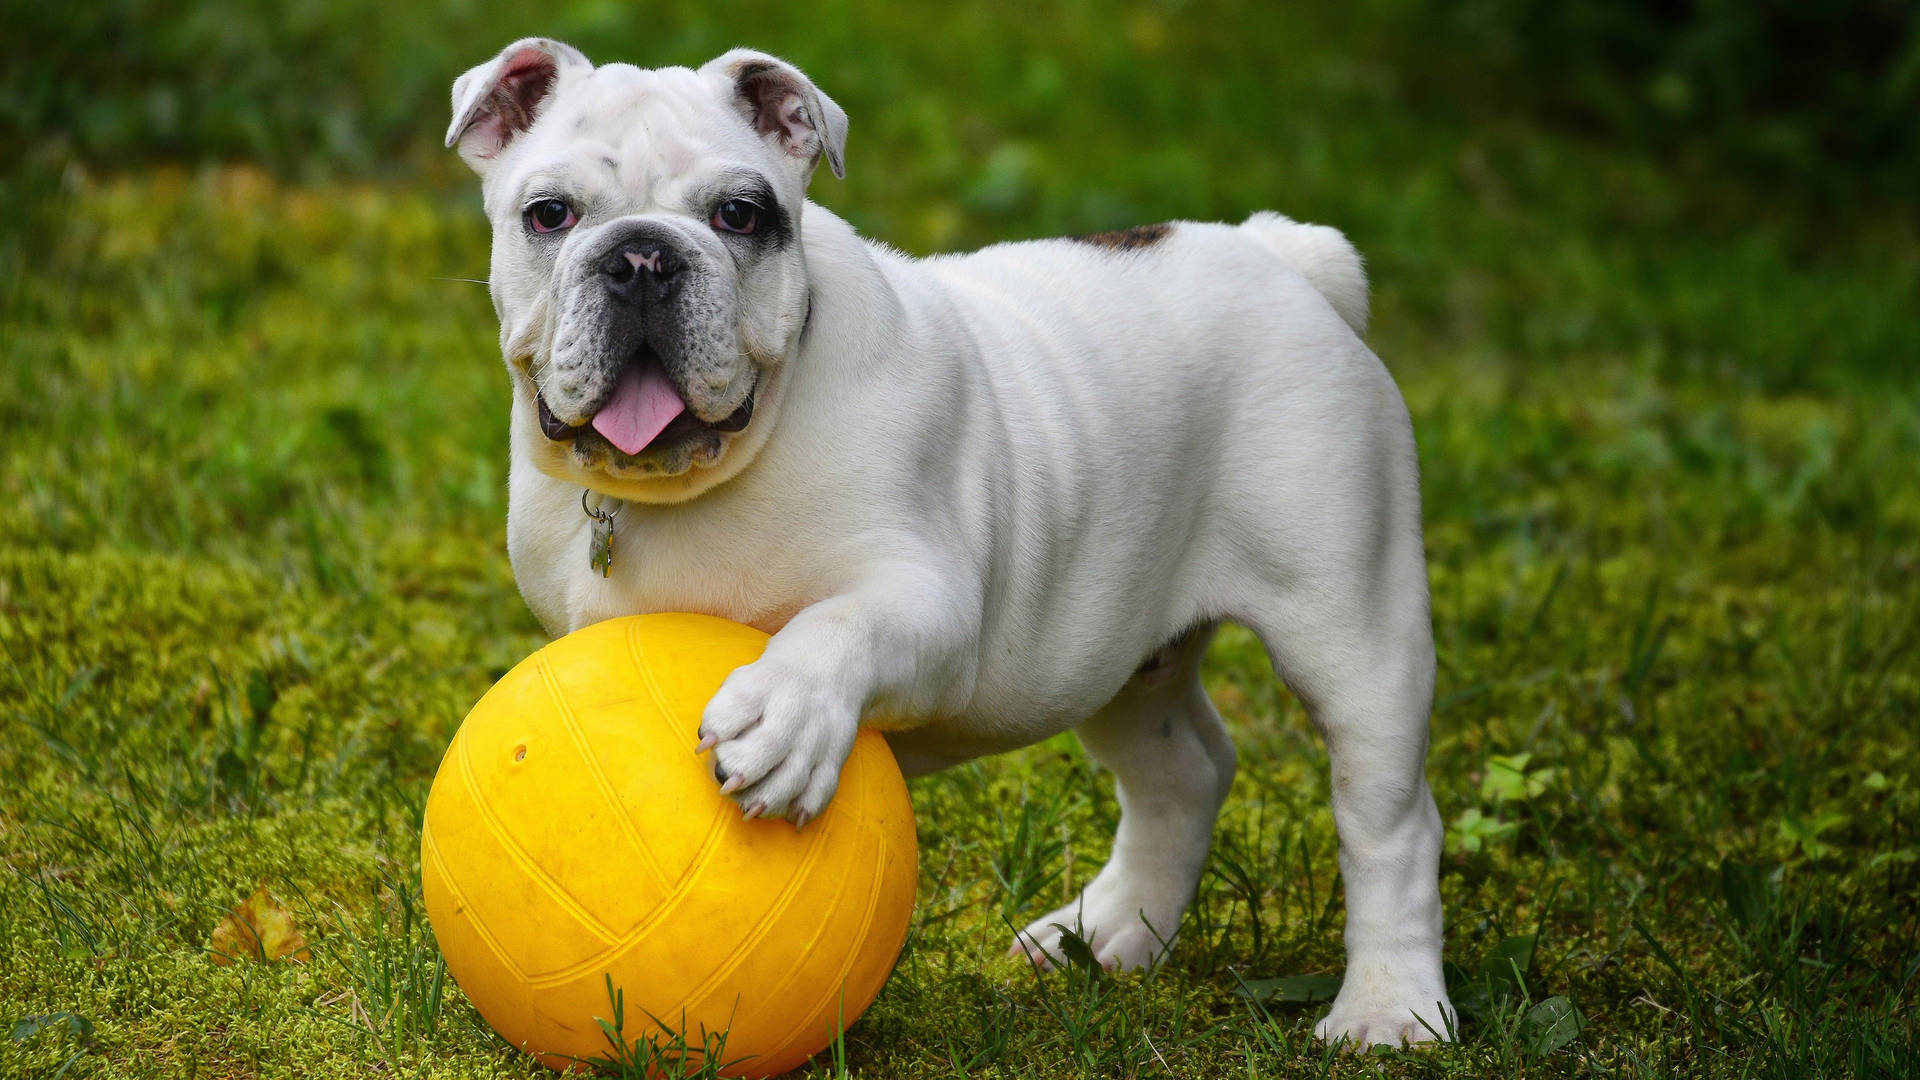 Free download Old English Bulldog Wallpapers High Resolution and Quality  Download 1920x1200 for your Desktop Mobile  Tablet  Explore 49 Old English  Bulldog Wallpaper  English Countryside Wallpaper English Bulldog Wallpaper 